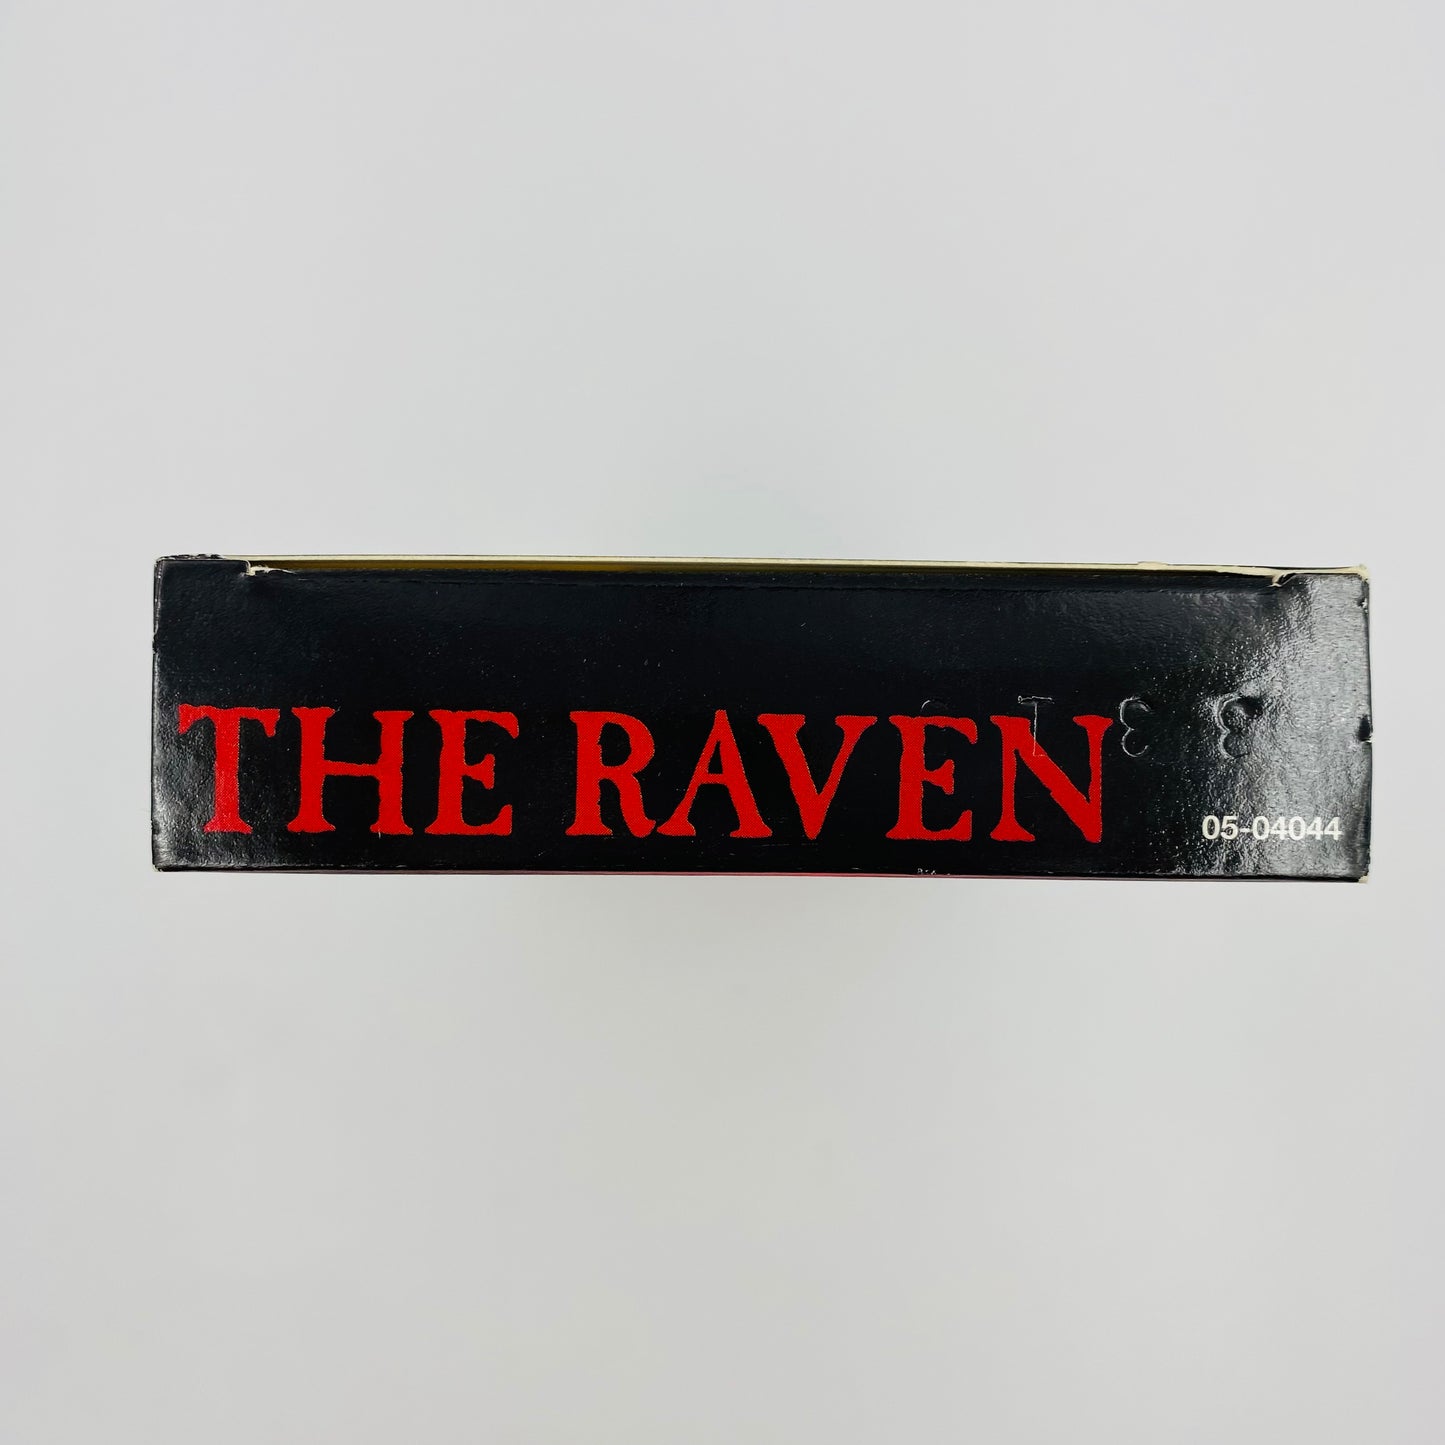 The Raven VHS tape (1993) GoodTimes Home Video